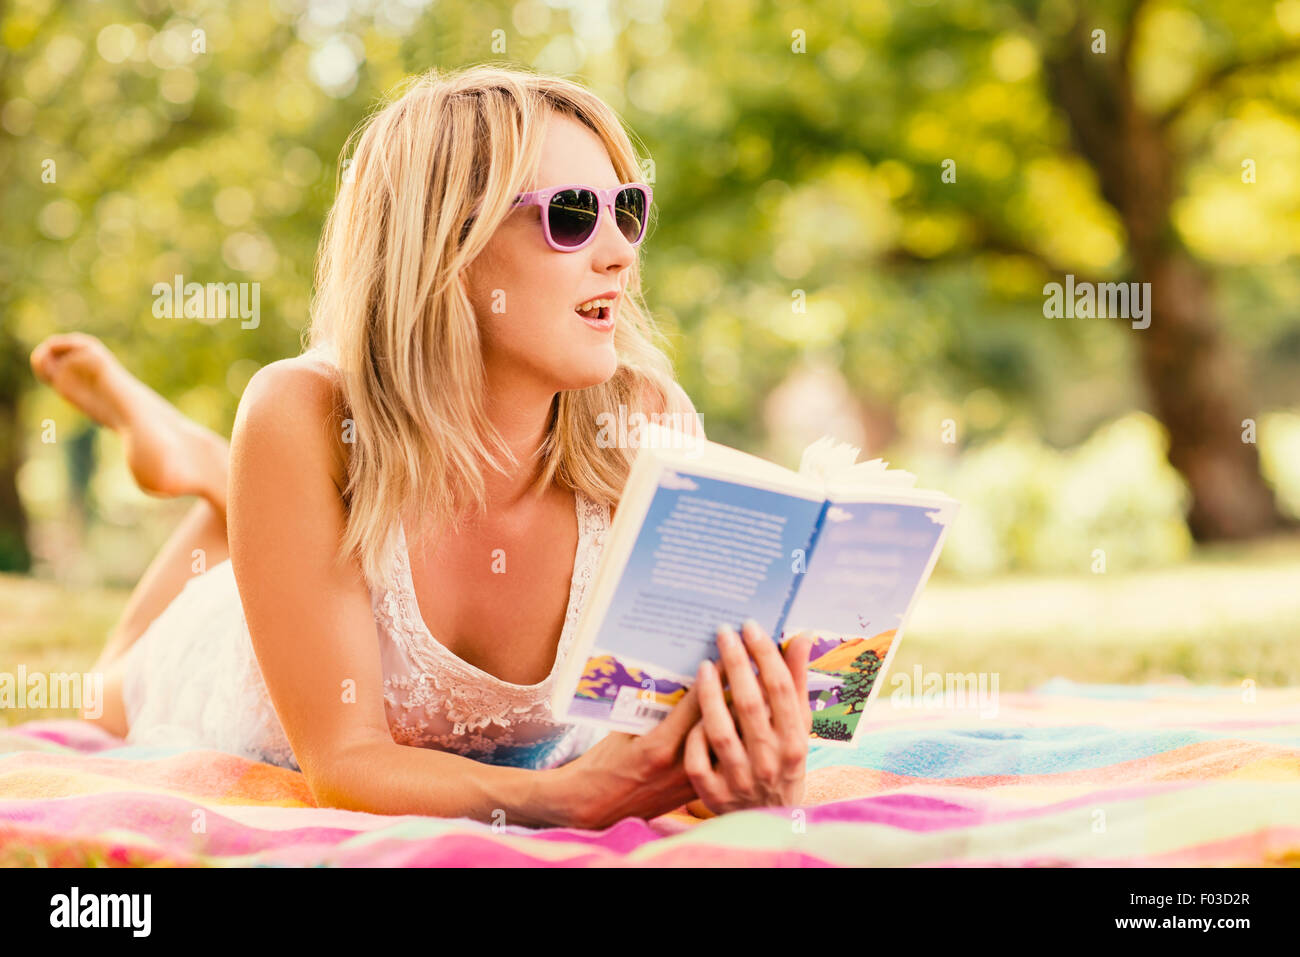 Woman reading on blanket in park Stock Photo